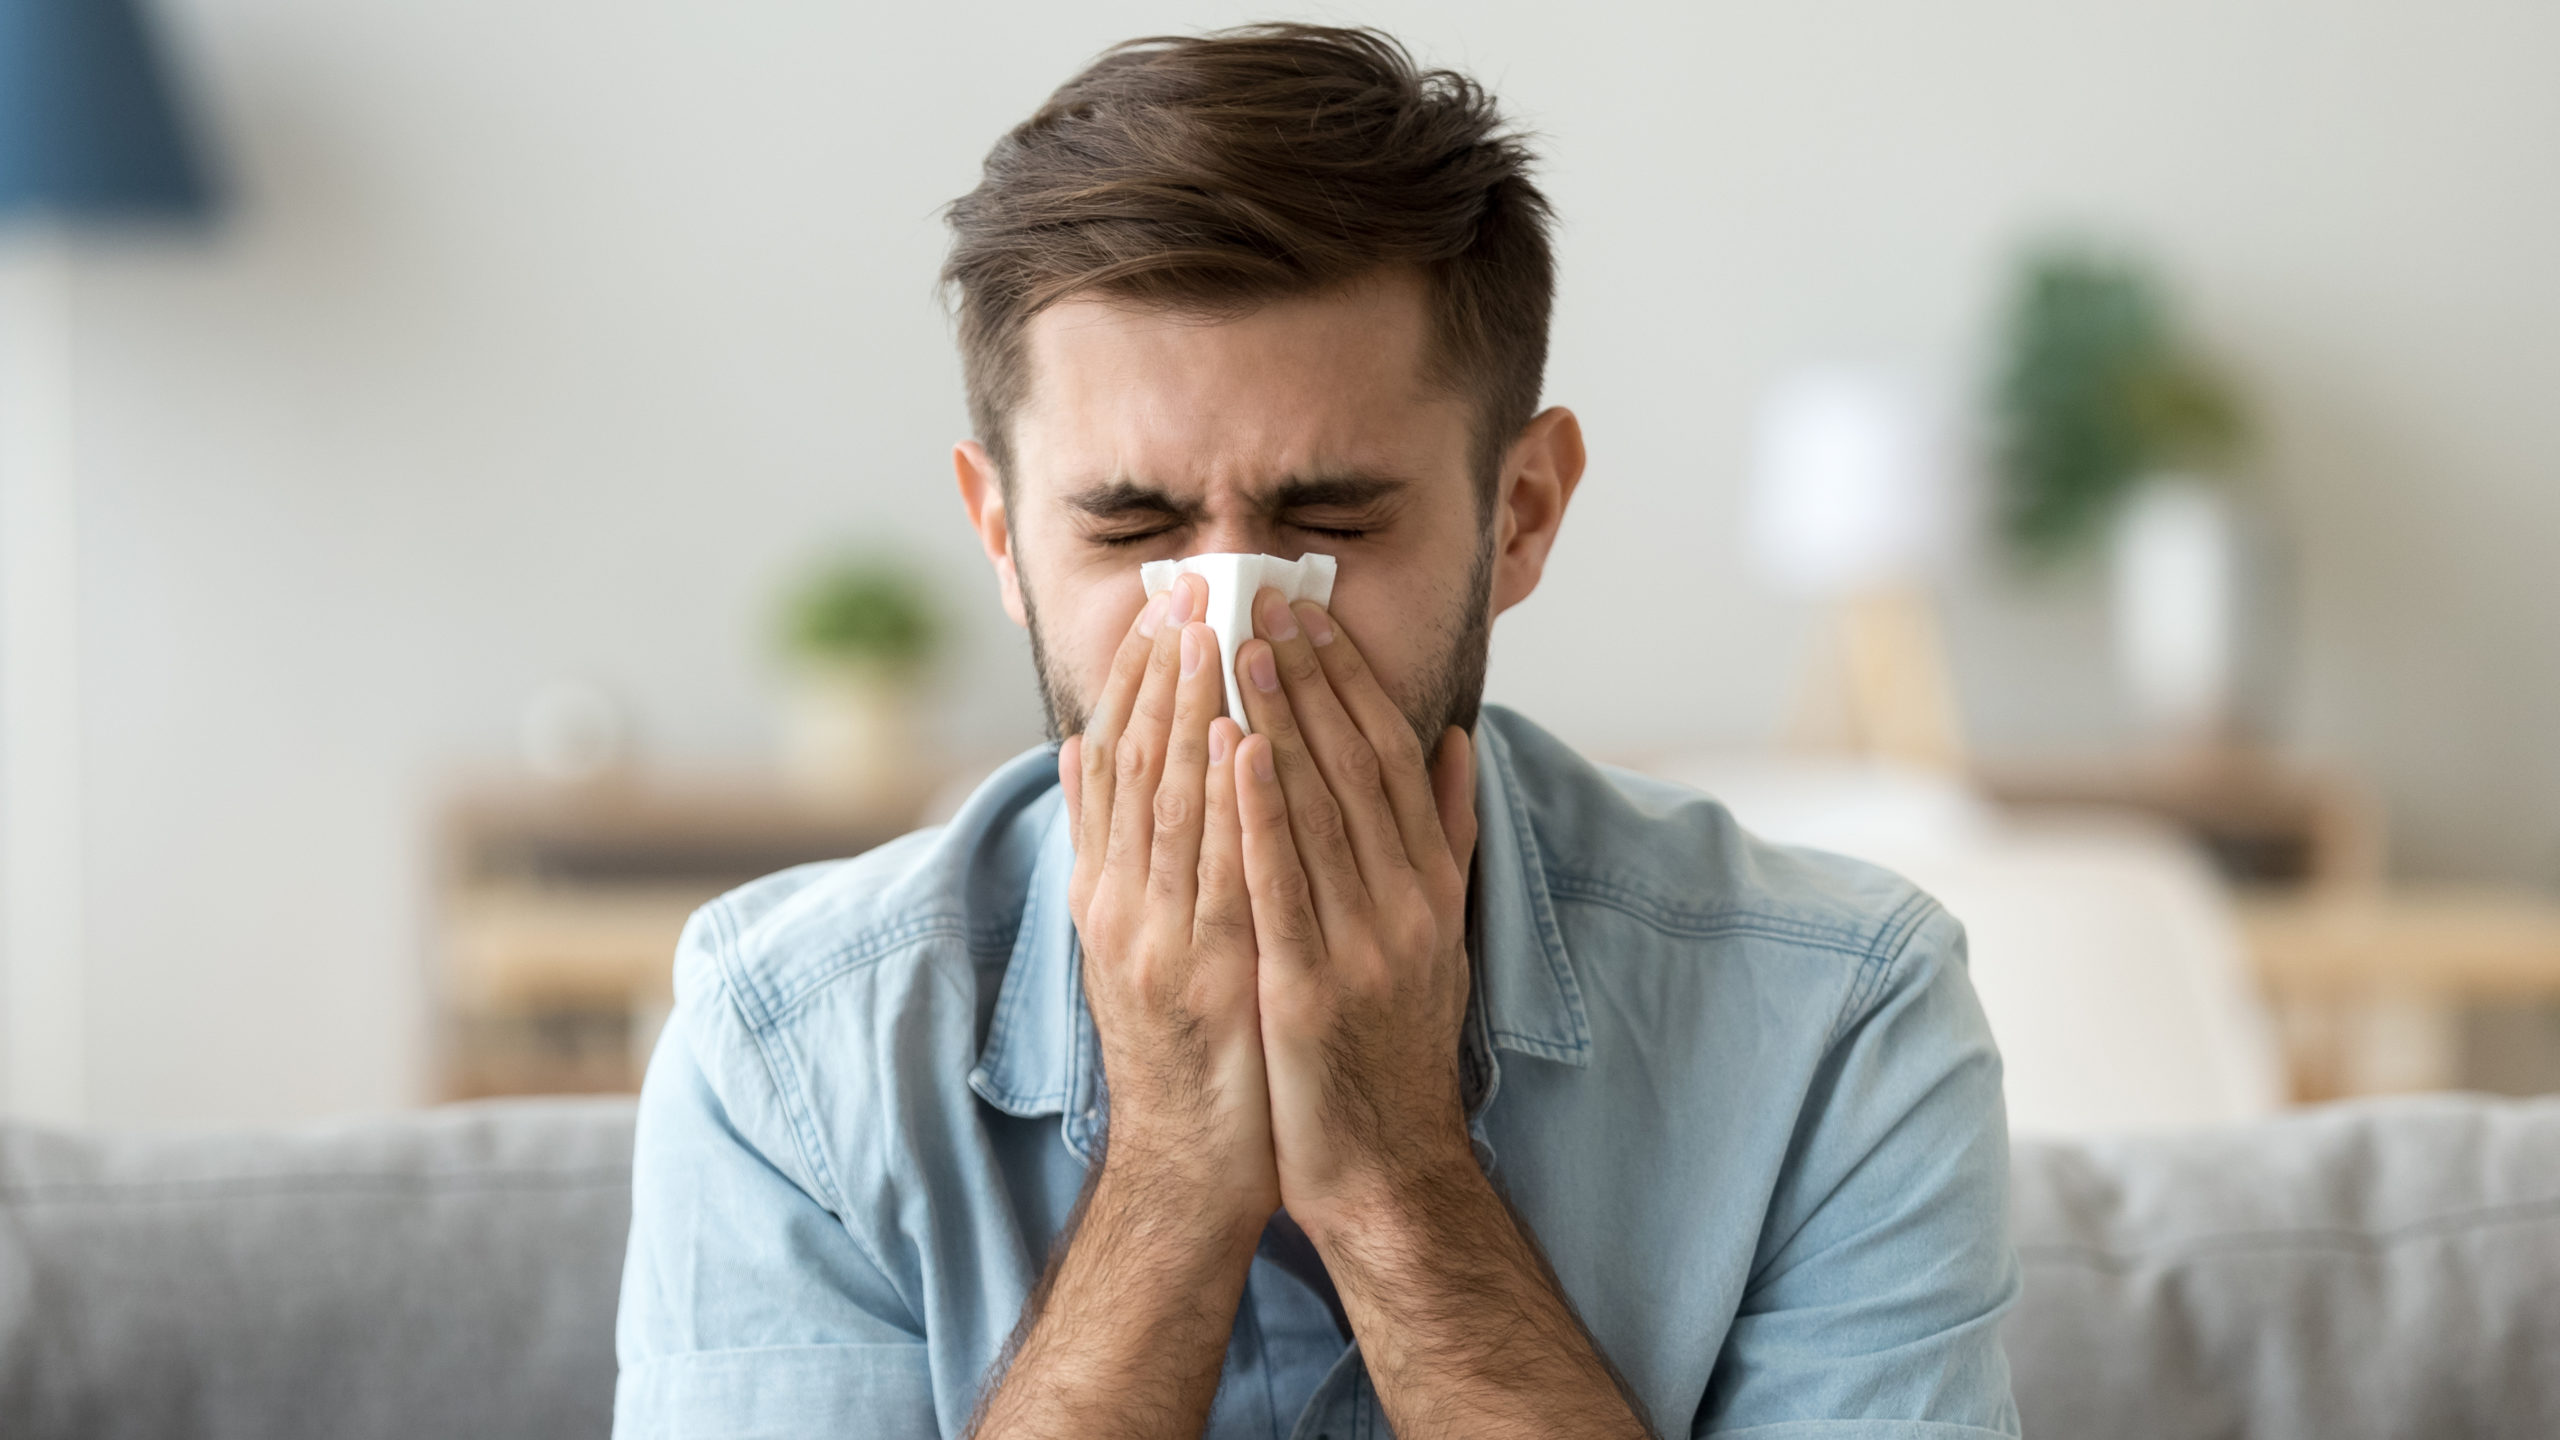 Flu and other respiratory virus activity continue to ramp up across the United States (Photo courte...